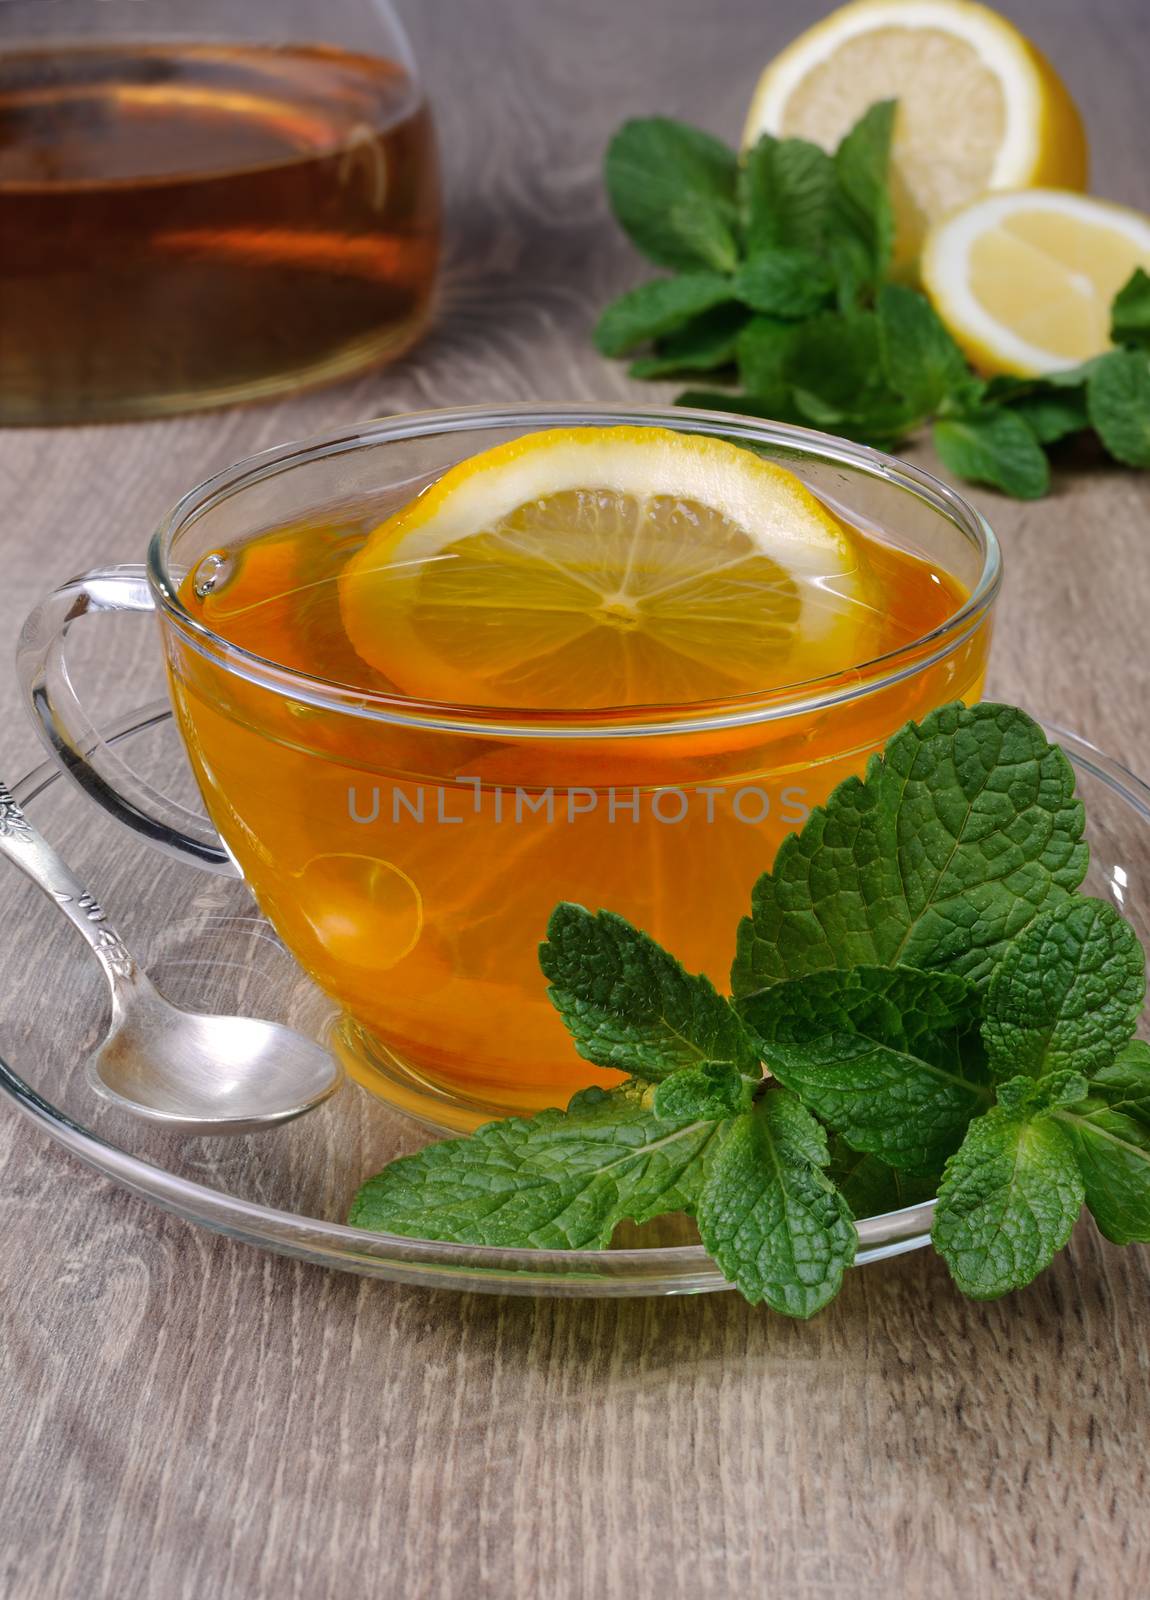 Cup of tea with a slice of lemon and  mint